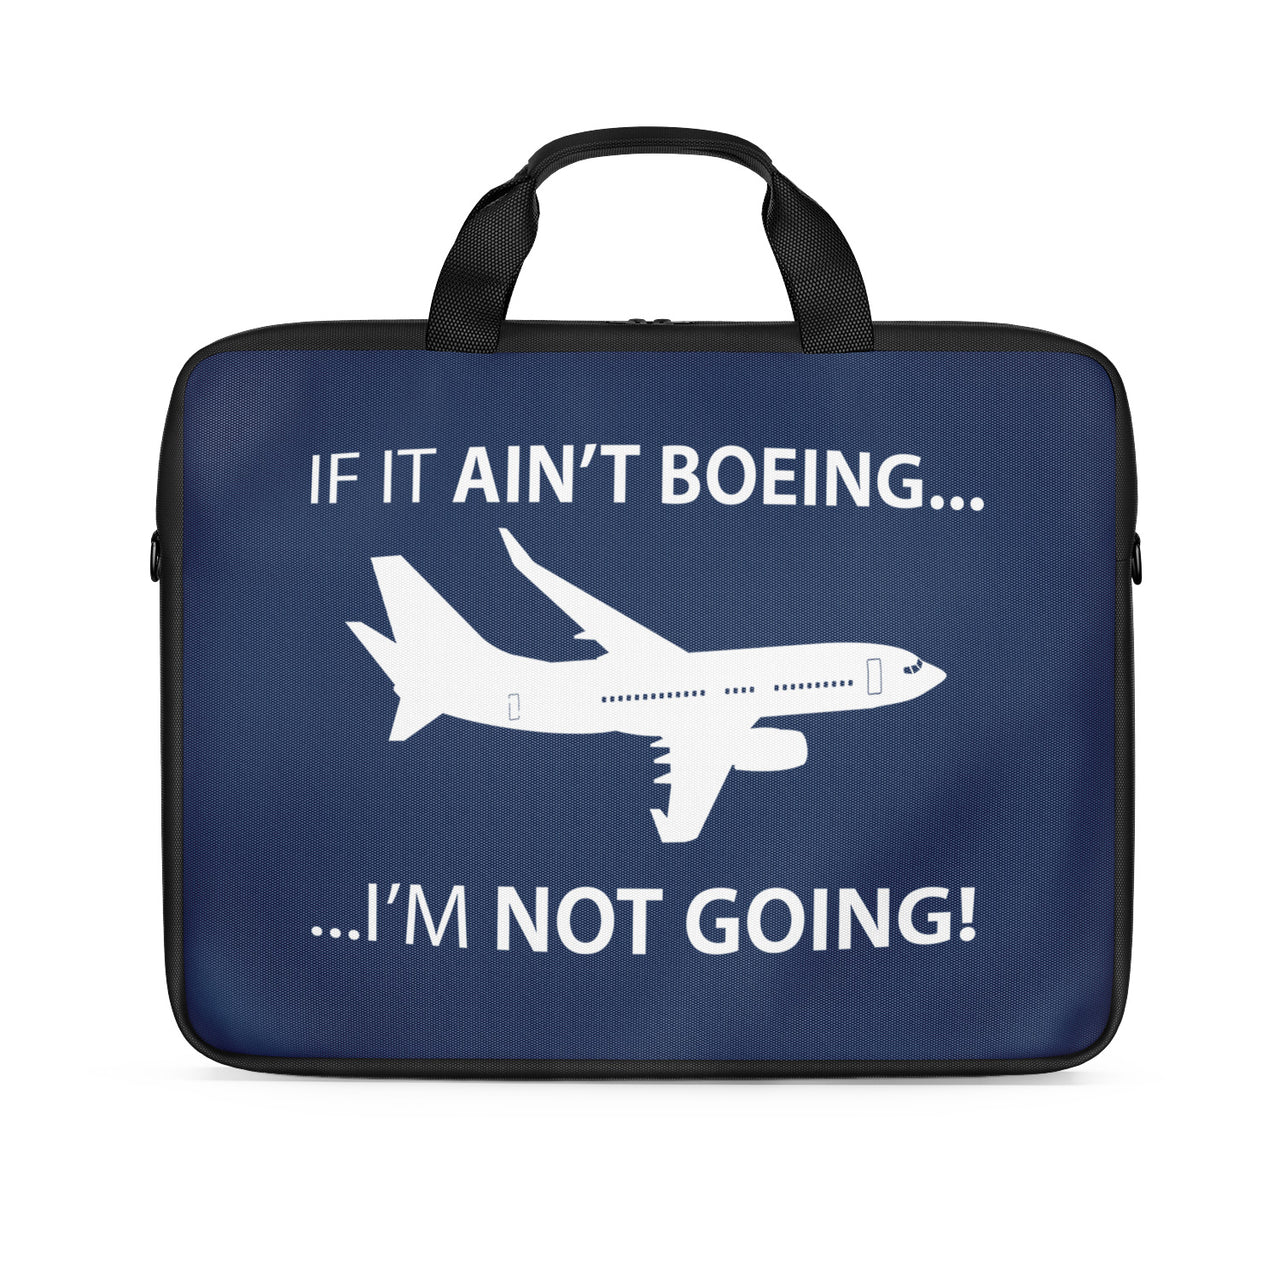 If It Ain't Boeing I'm Not Going! Designed Laptop & Tablet Bags